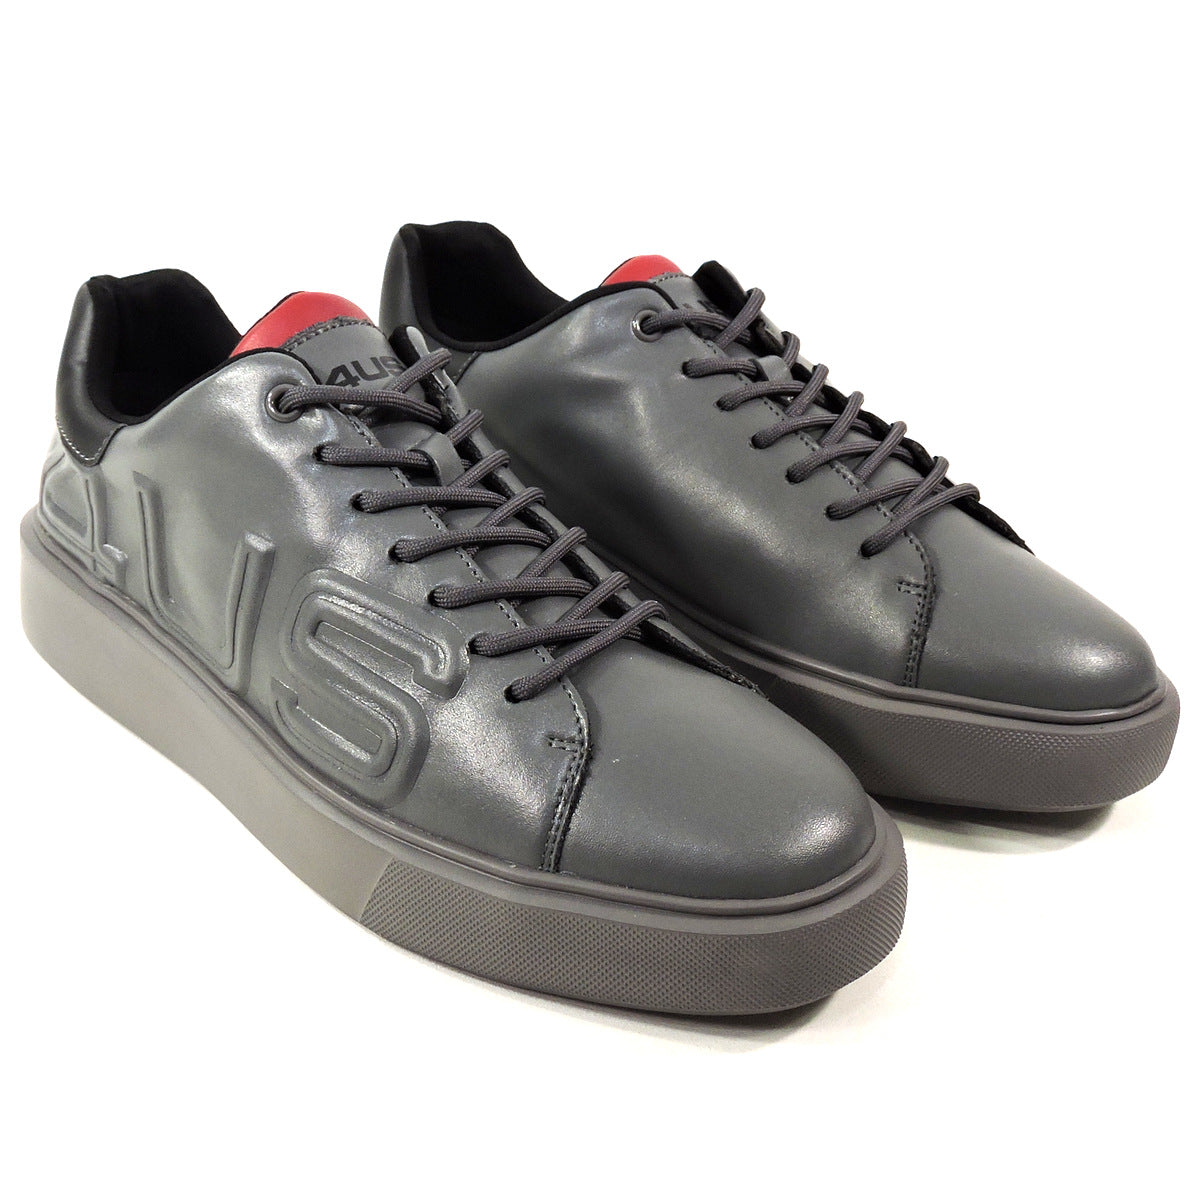 CESARE PACIOTTI 4US 🇮🇹 MENS GREY SOFT LEATHER COMFORT SNEAKERS